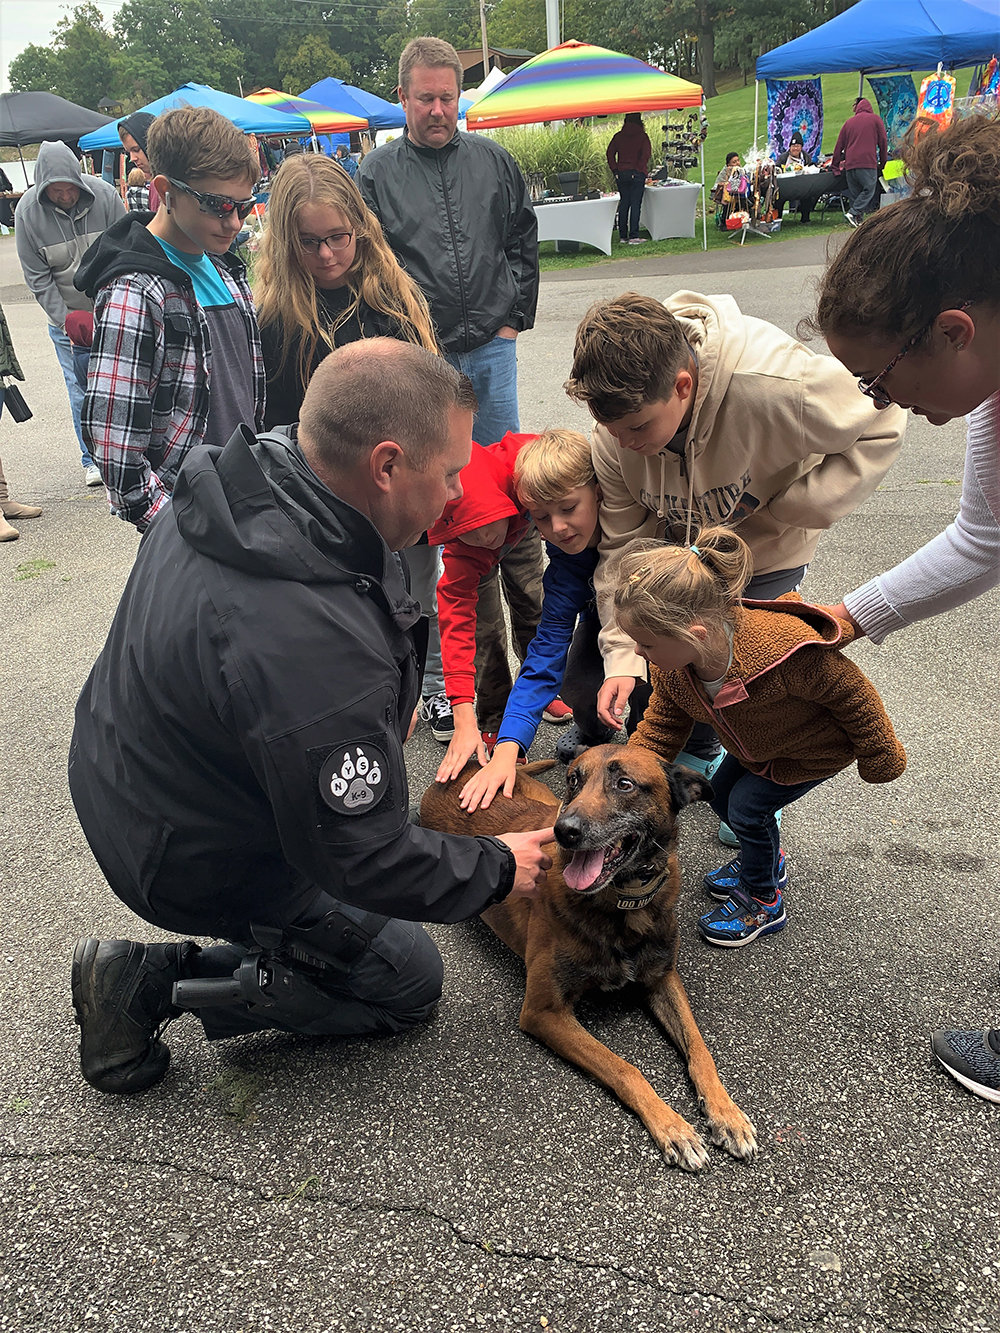 A NYS Police officer allowed the kids to pet one of his prized K9 dogs